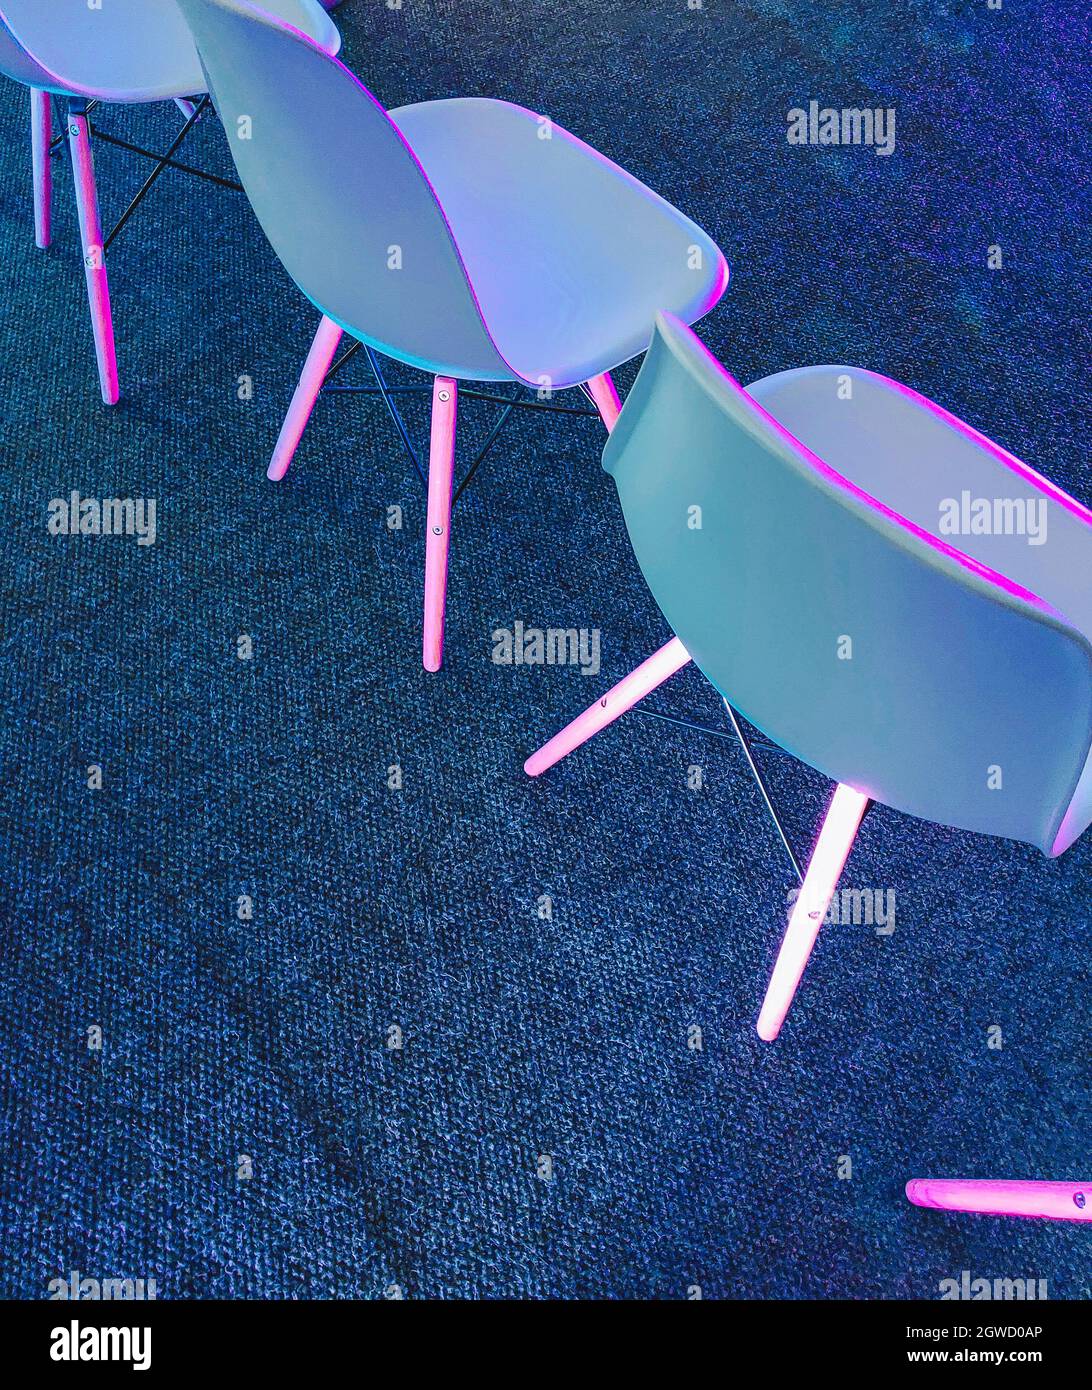 White Chairs In The Neon Light In The Club Stock Photo